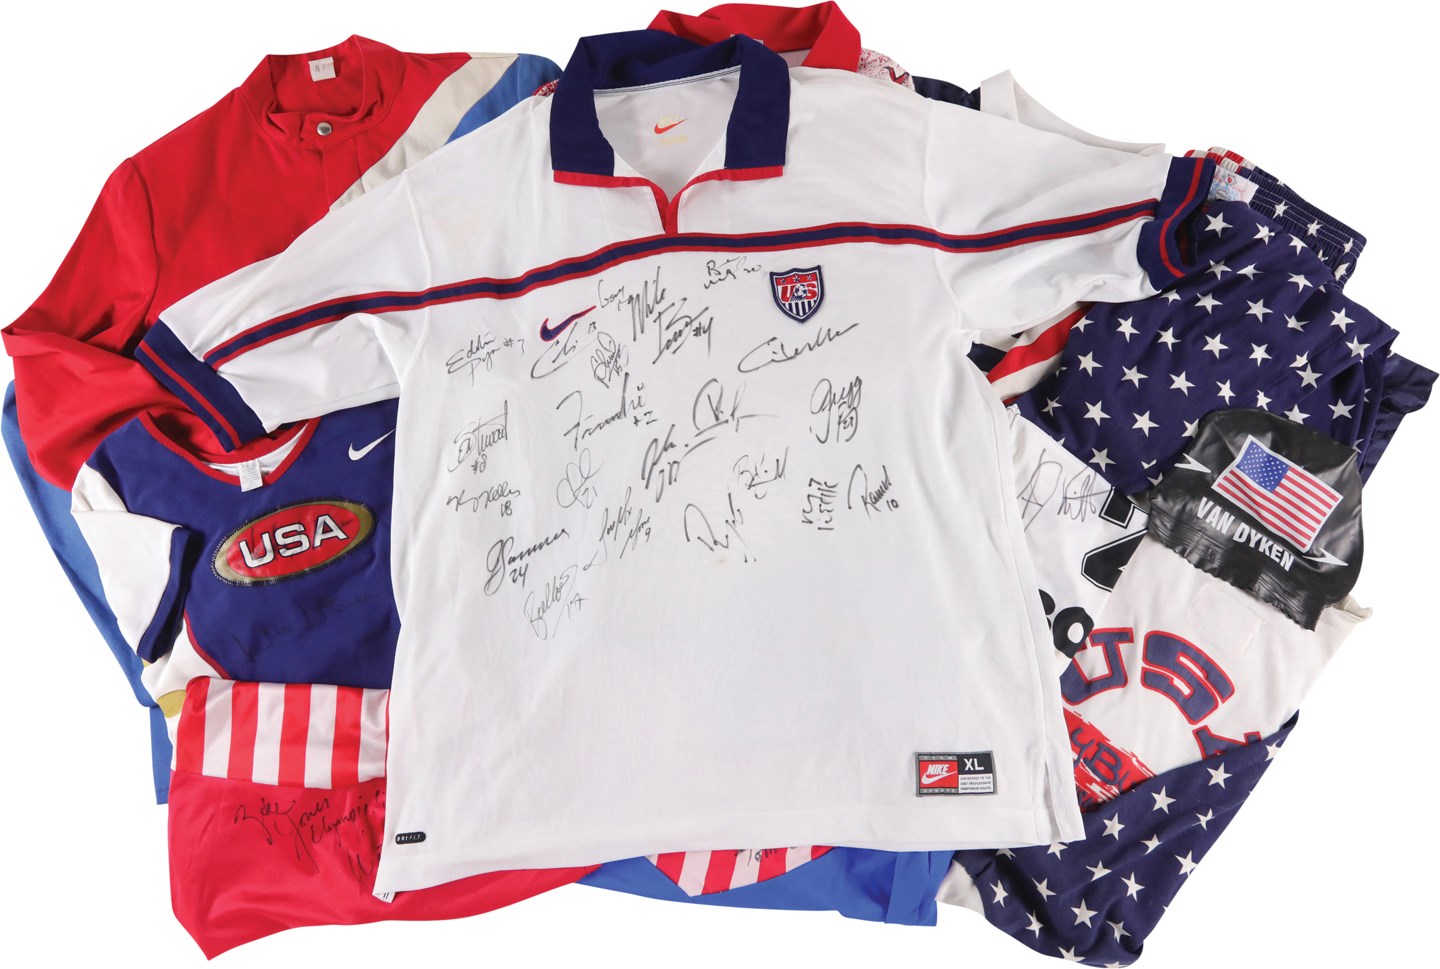 USA Sports Worn and Signed Equipment Collection (14)